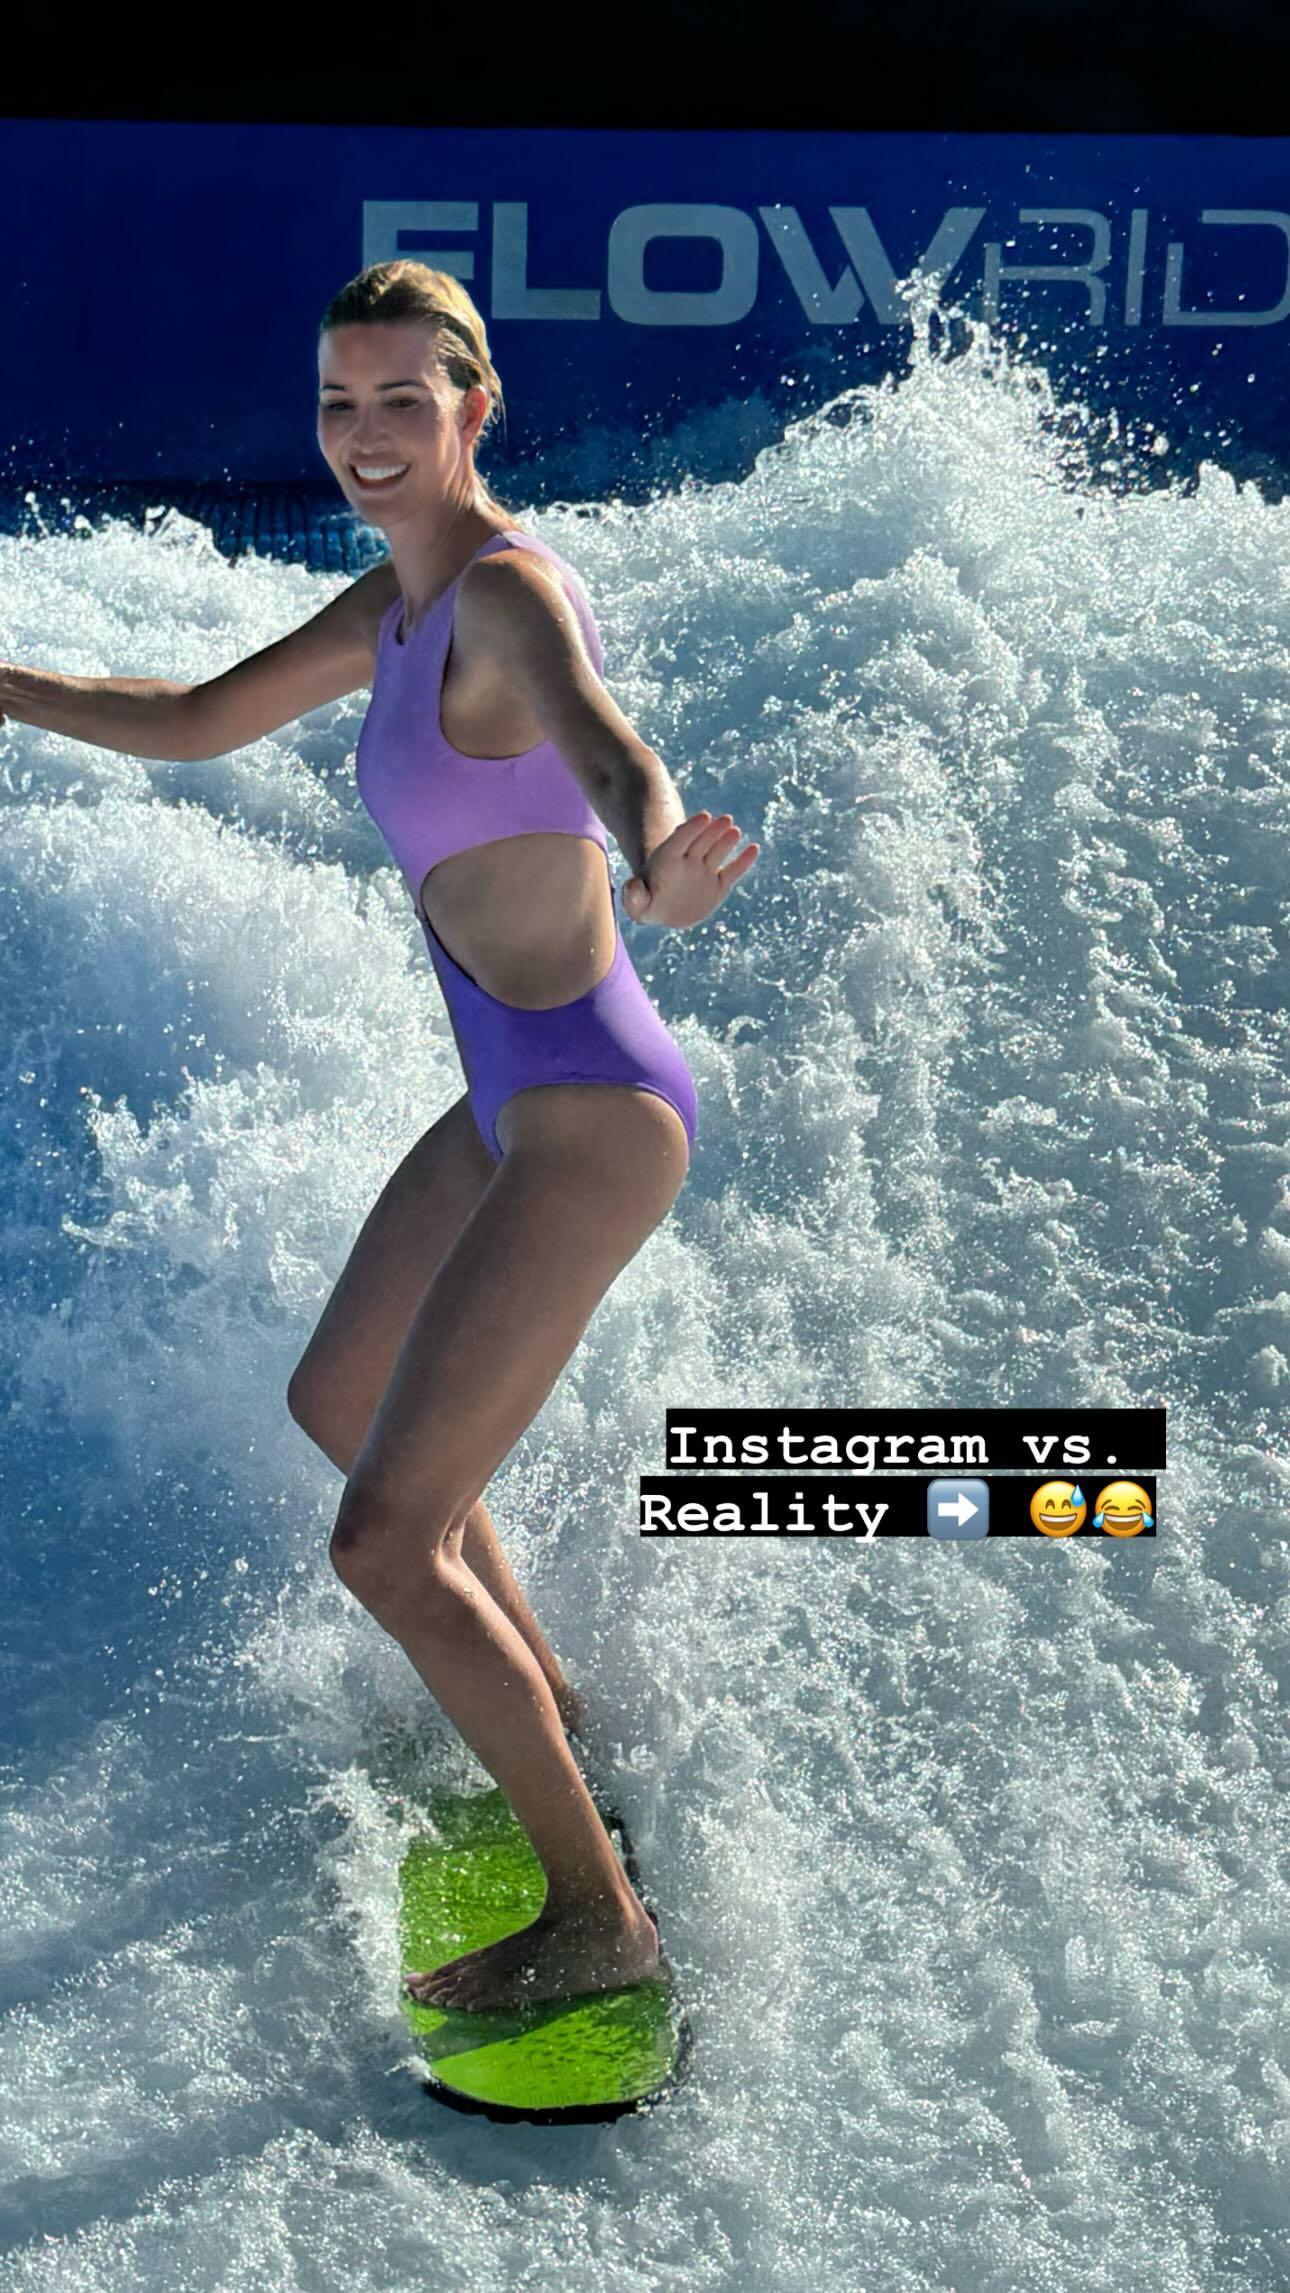 Ivanka Trump suffers a wipeout while surfing in a stunning purple swimsuit